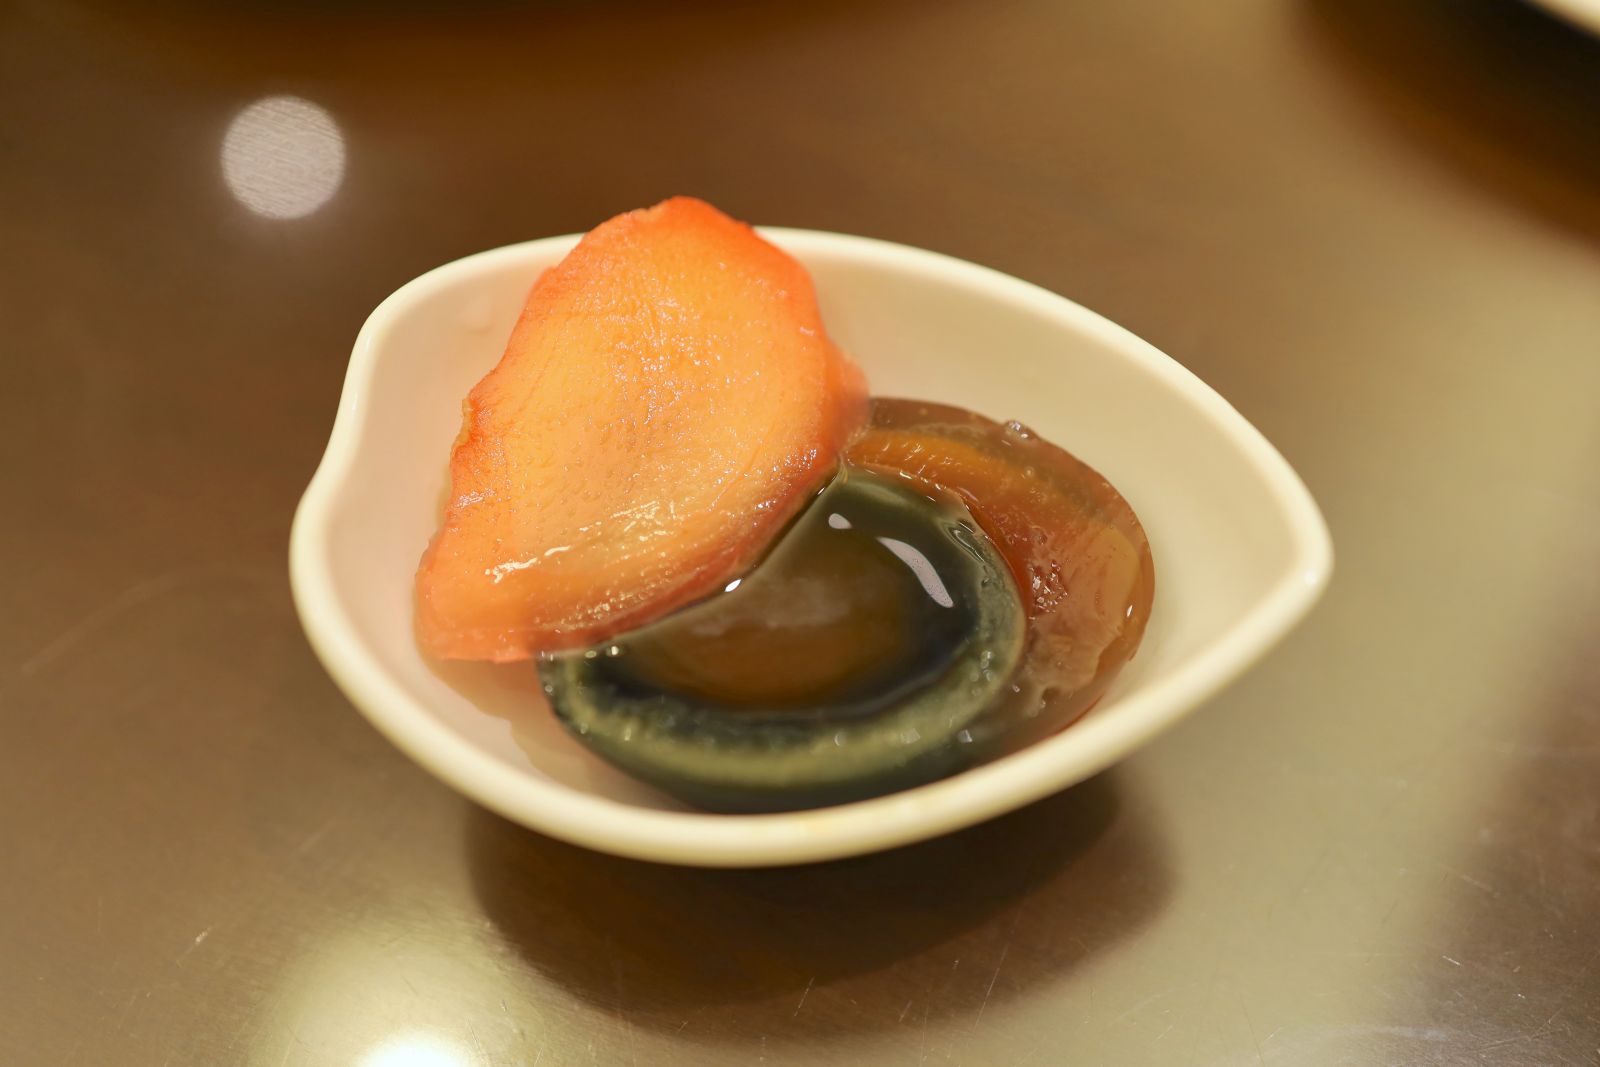 The century egg is served with pickled young ginger.